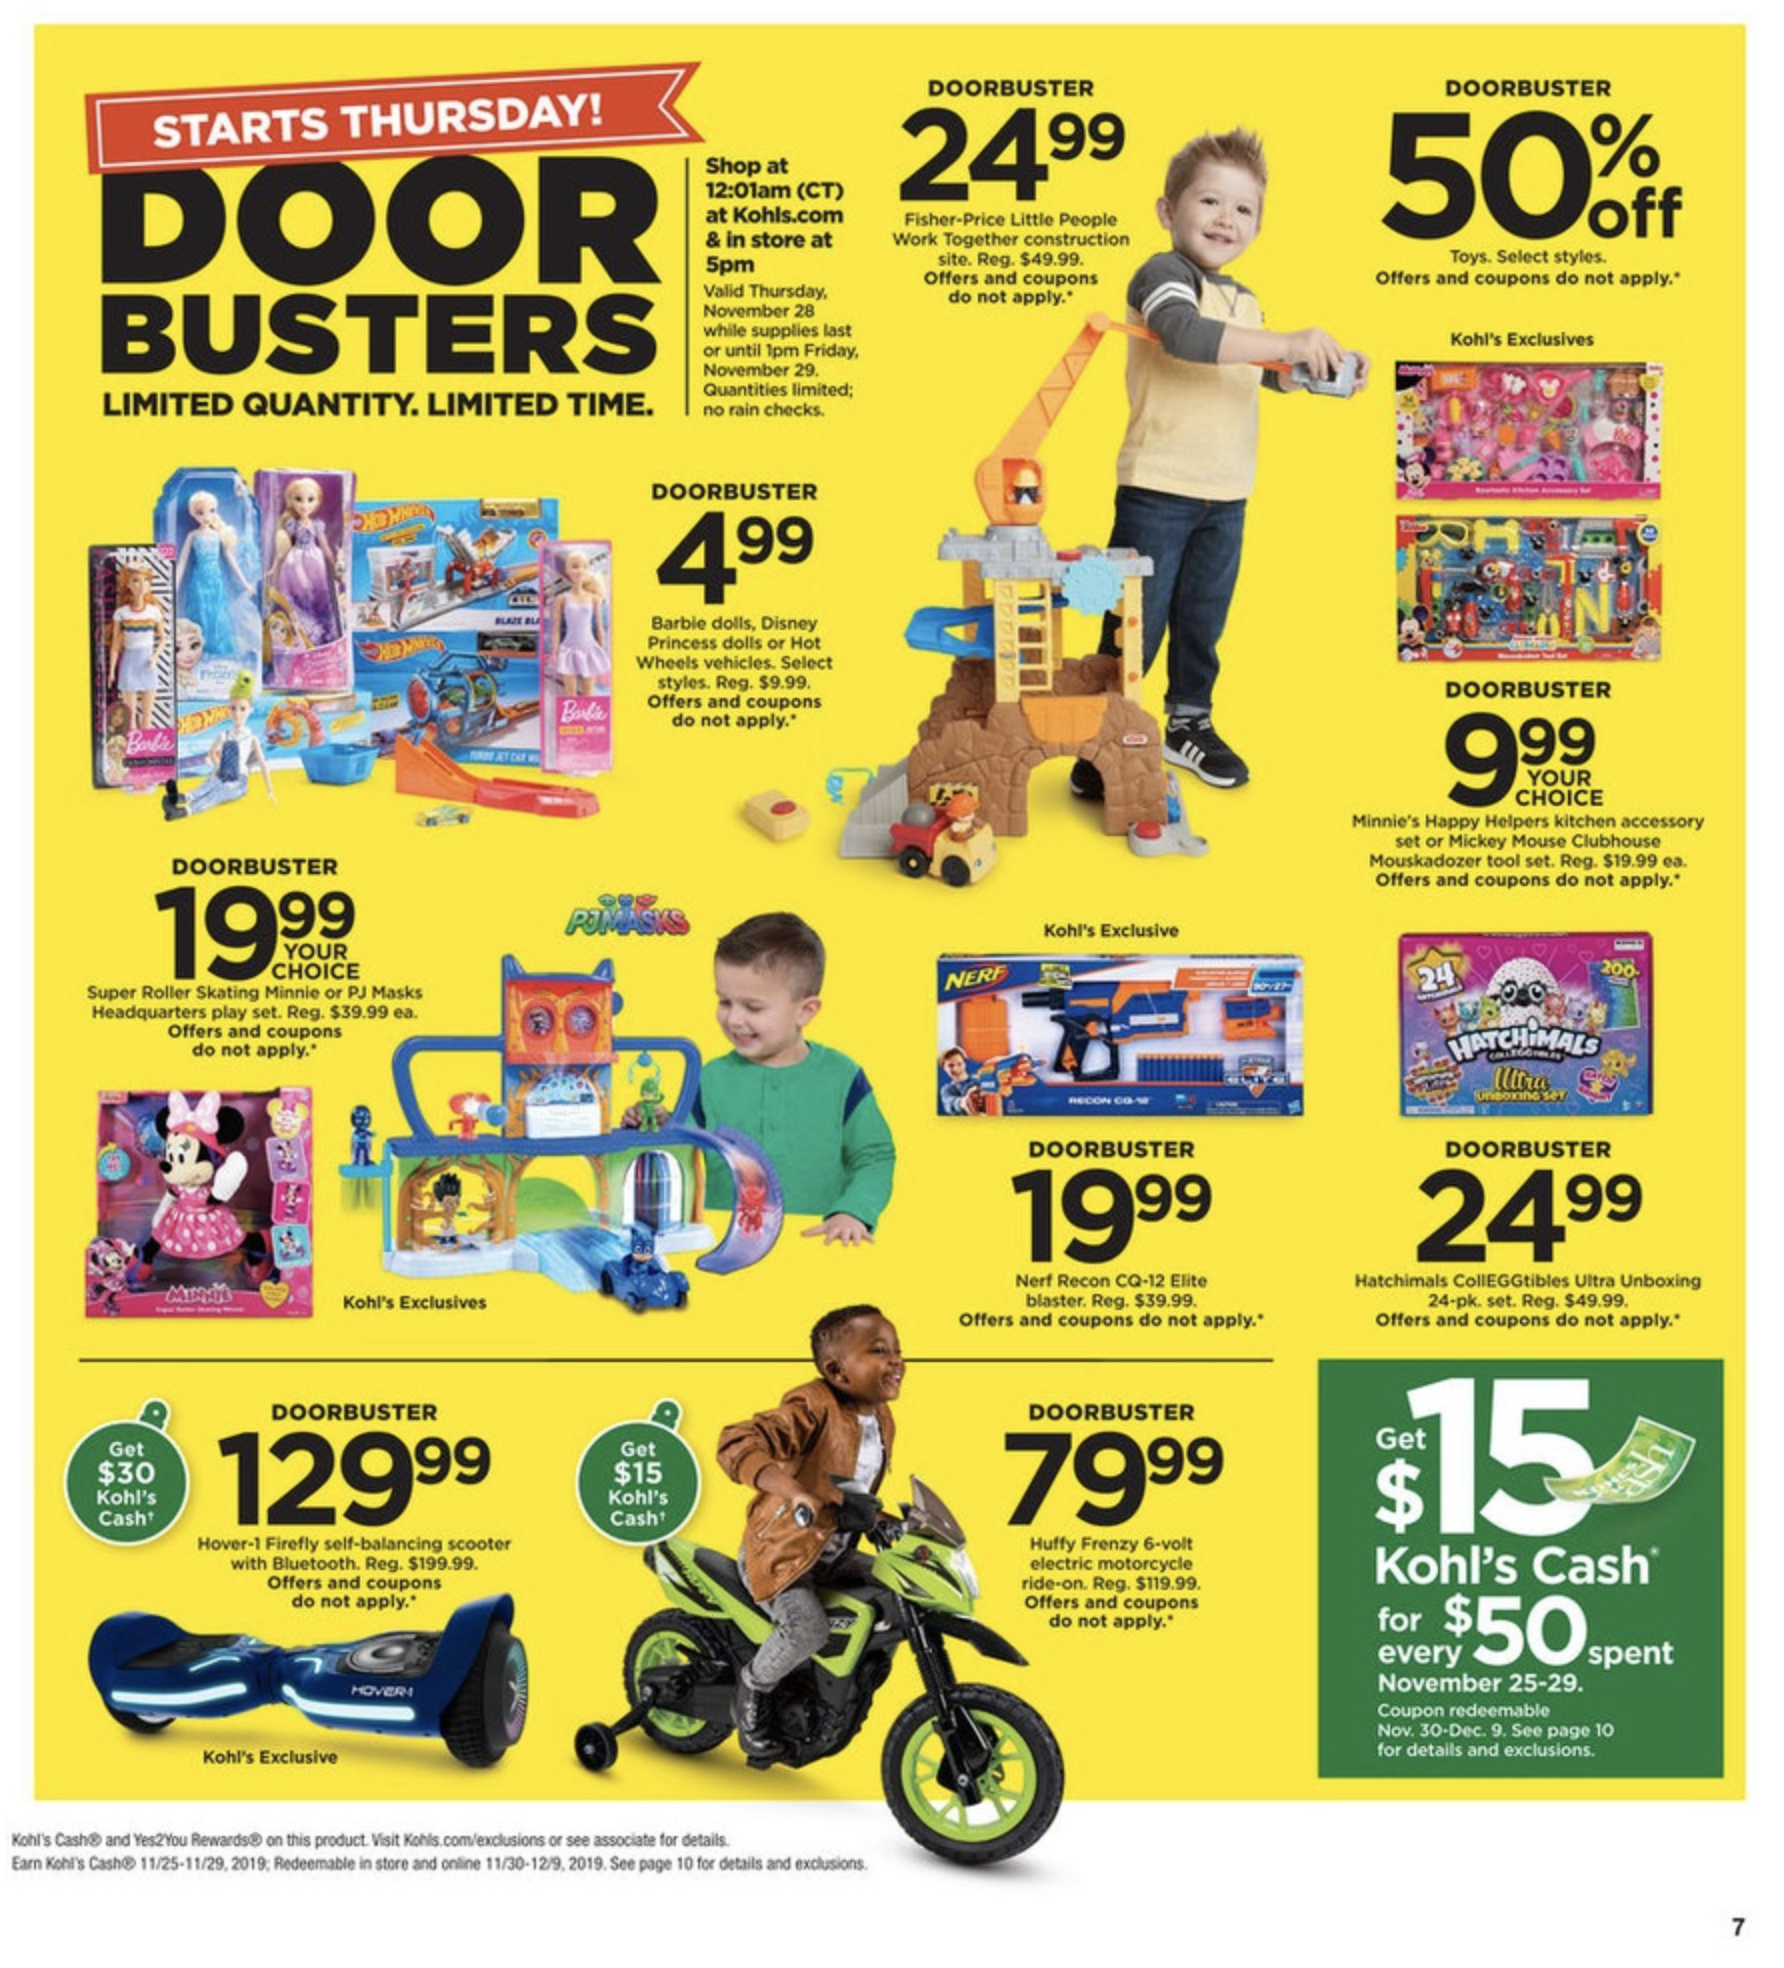 Kohl's Black Friday Ad 2019 unveiled with rotating deals, more - 9to5Toys